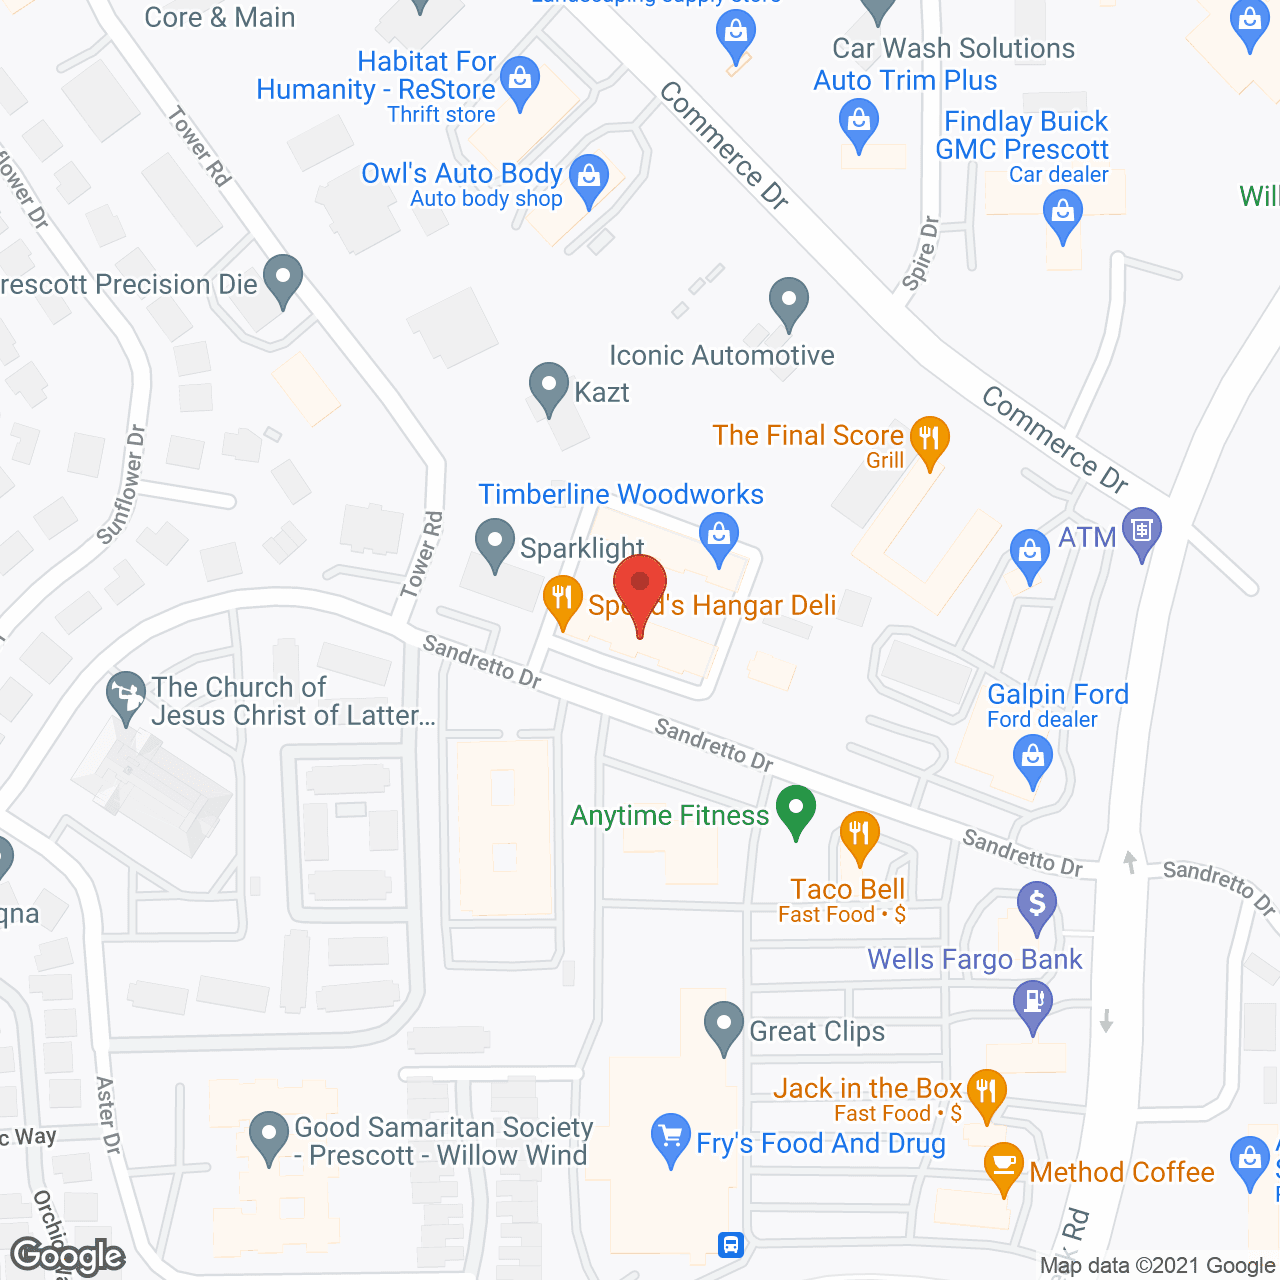 Lincare in google map